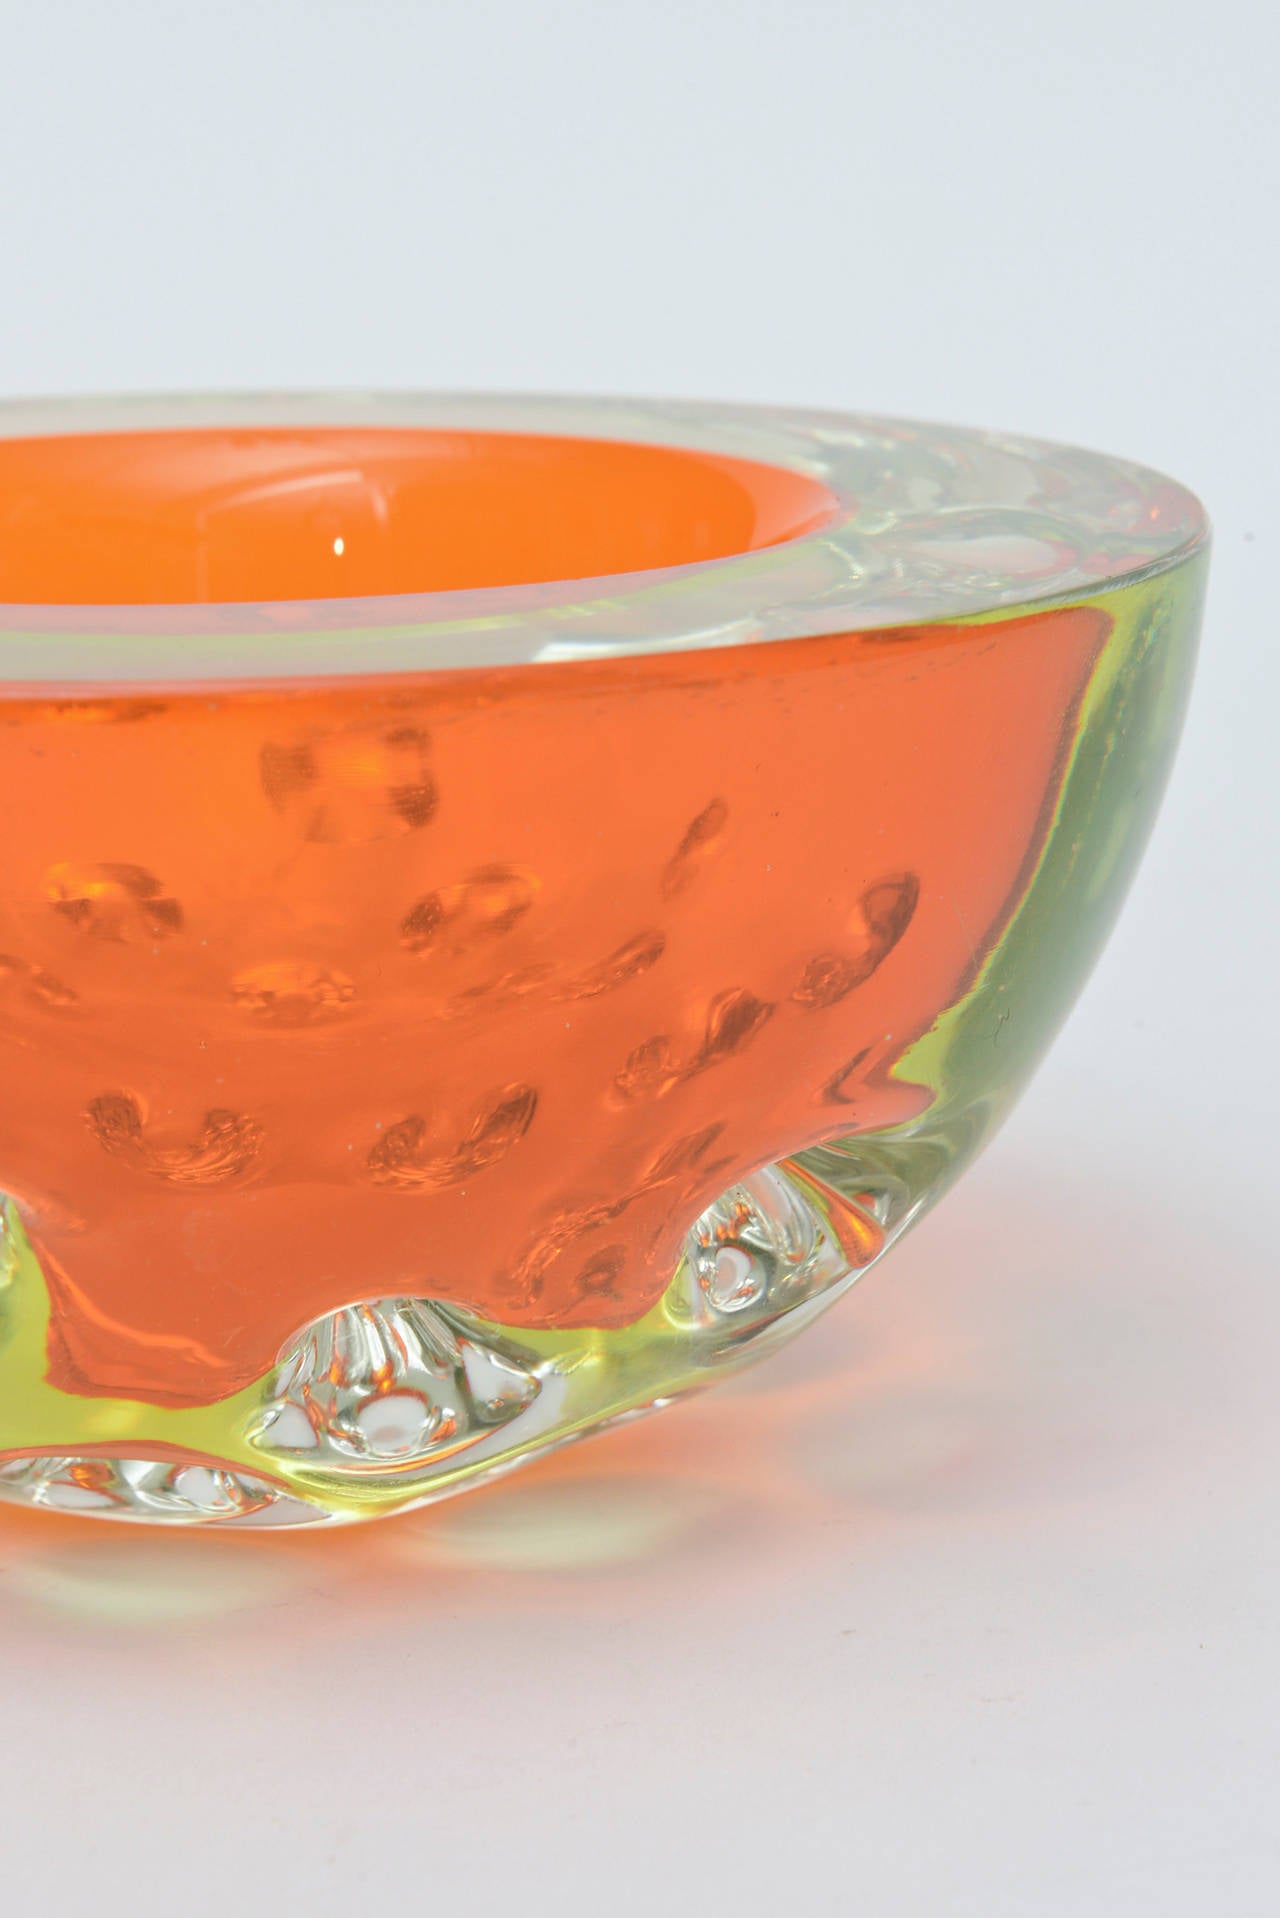 This amazing rare Italian Murano glass geode bowl has the luscious color of orange with a hint of yellow chartreuse Sommerso. It has the flat cut polished top. It is spectacular. Heavy and substantial in form, color and weight.
Orange is a special